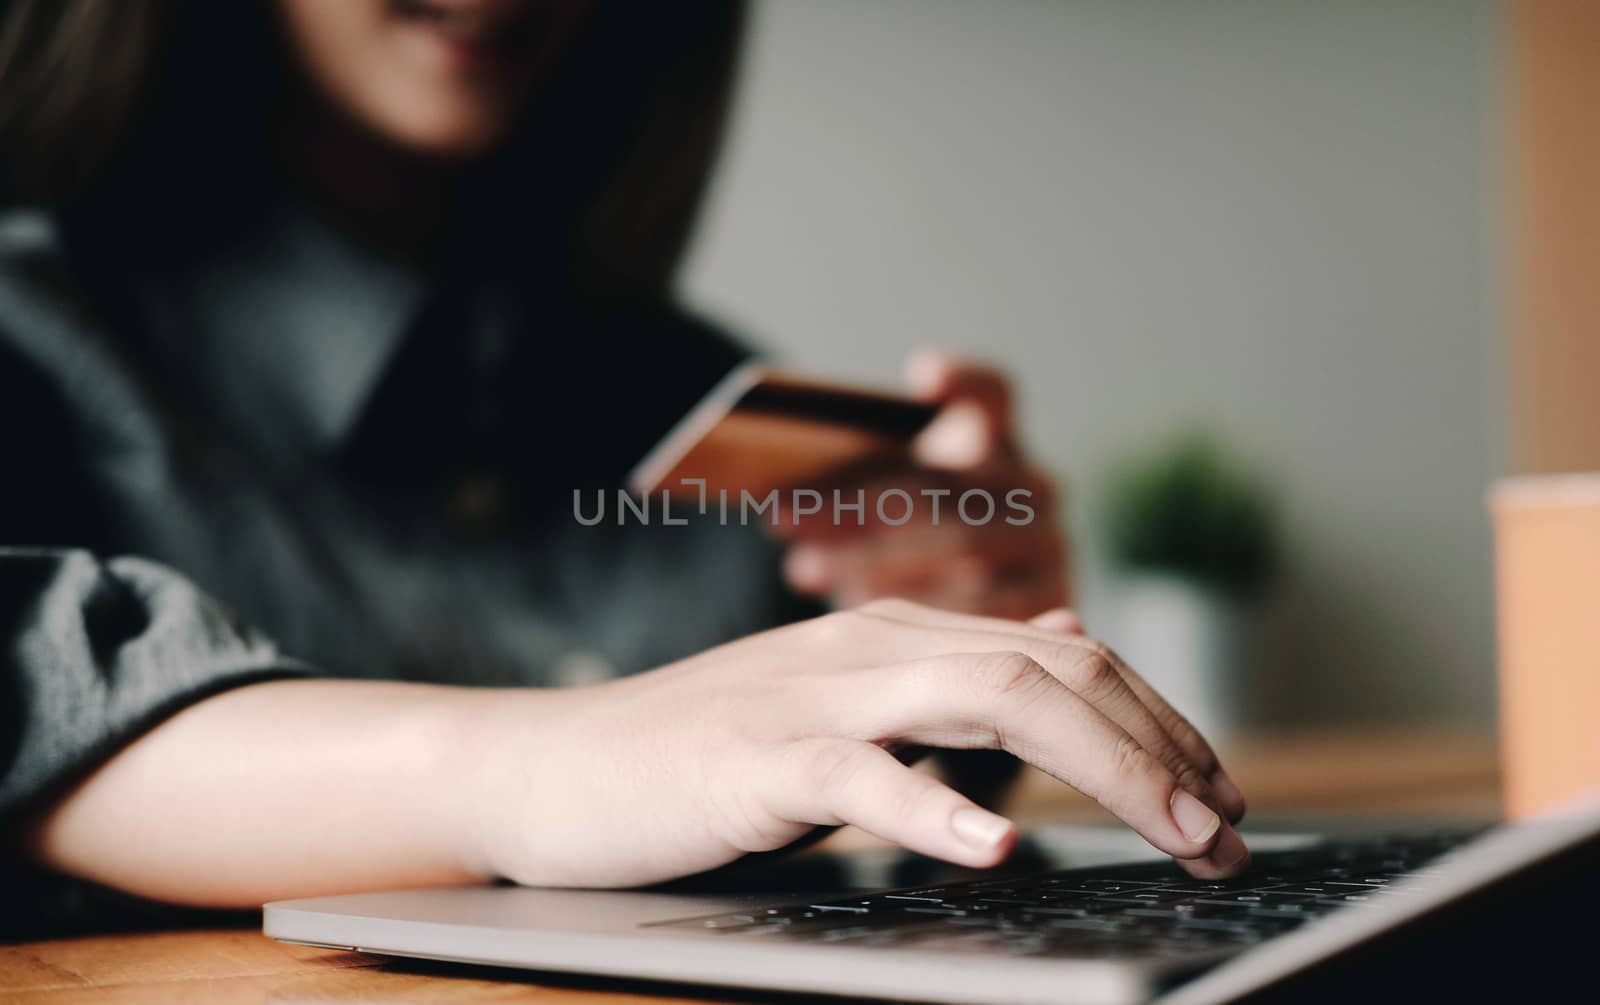 Online payment, digital banking. woman hand using credit card for online shopping via laptop computer on table.